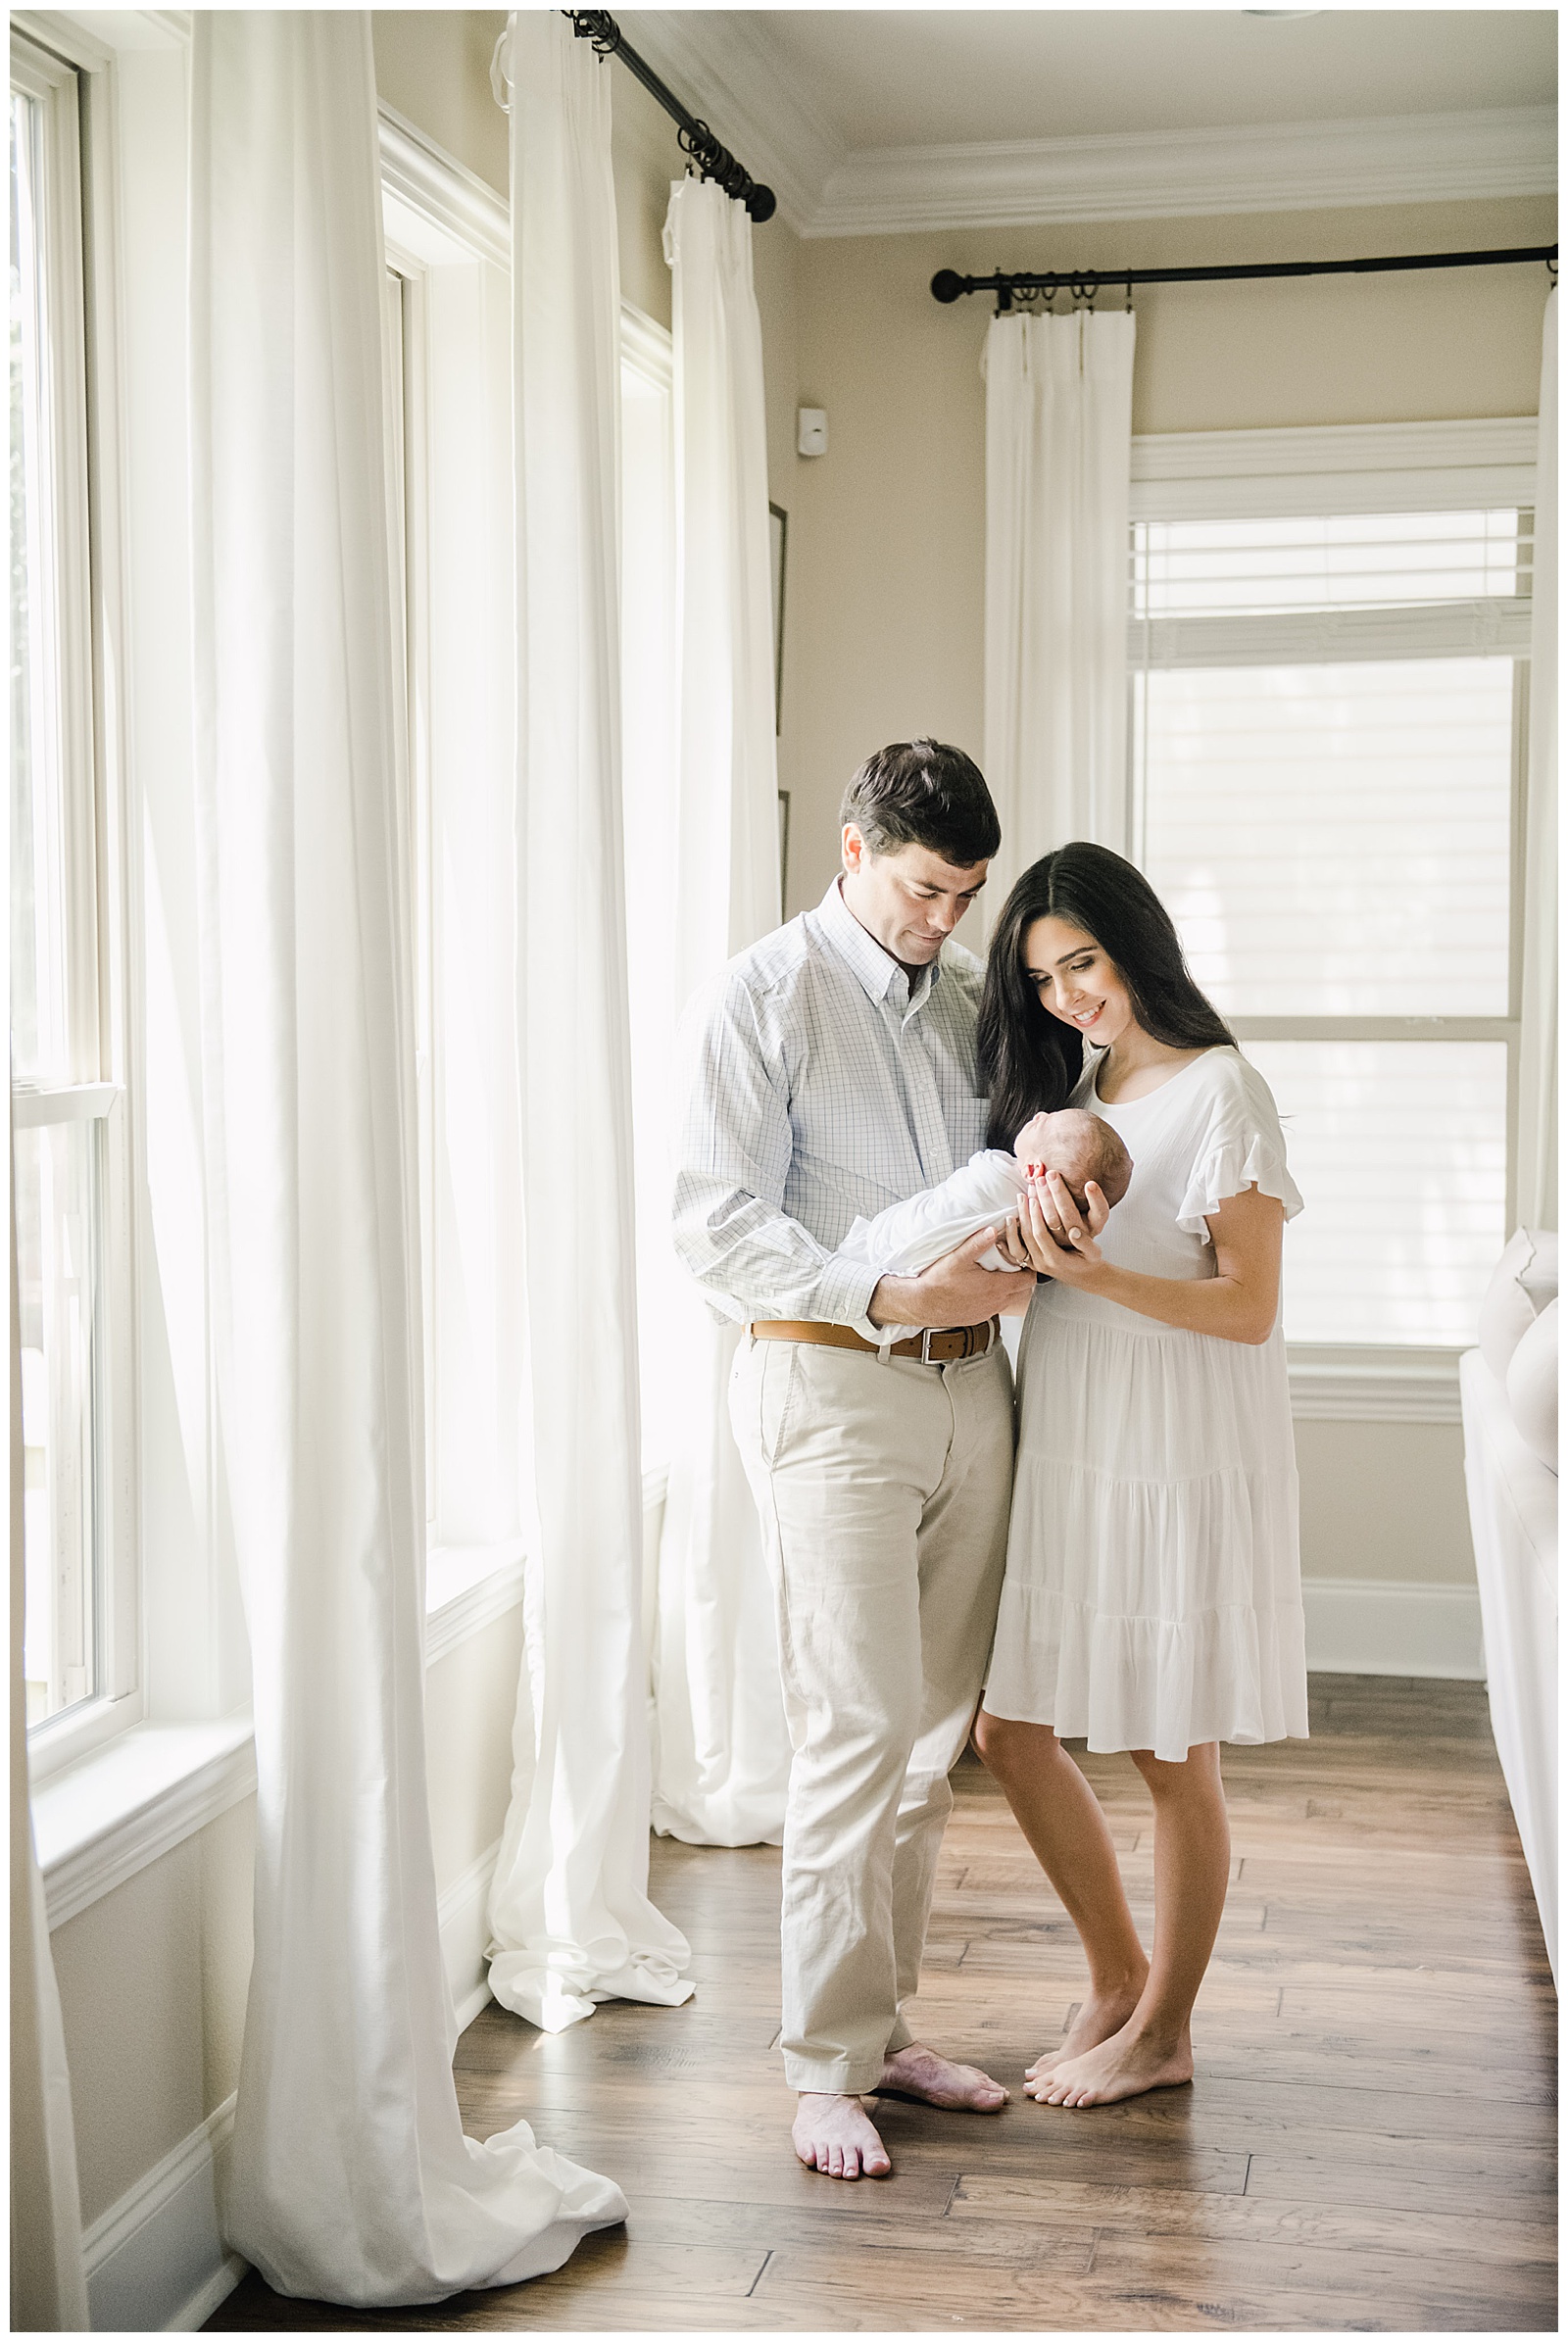 New Orleans Baby Photographer Chelsea Rousey Photography mom and dad holding baby